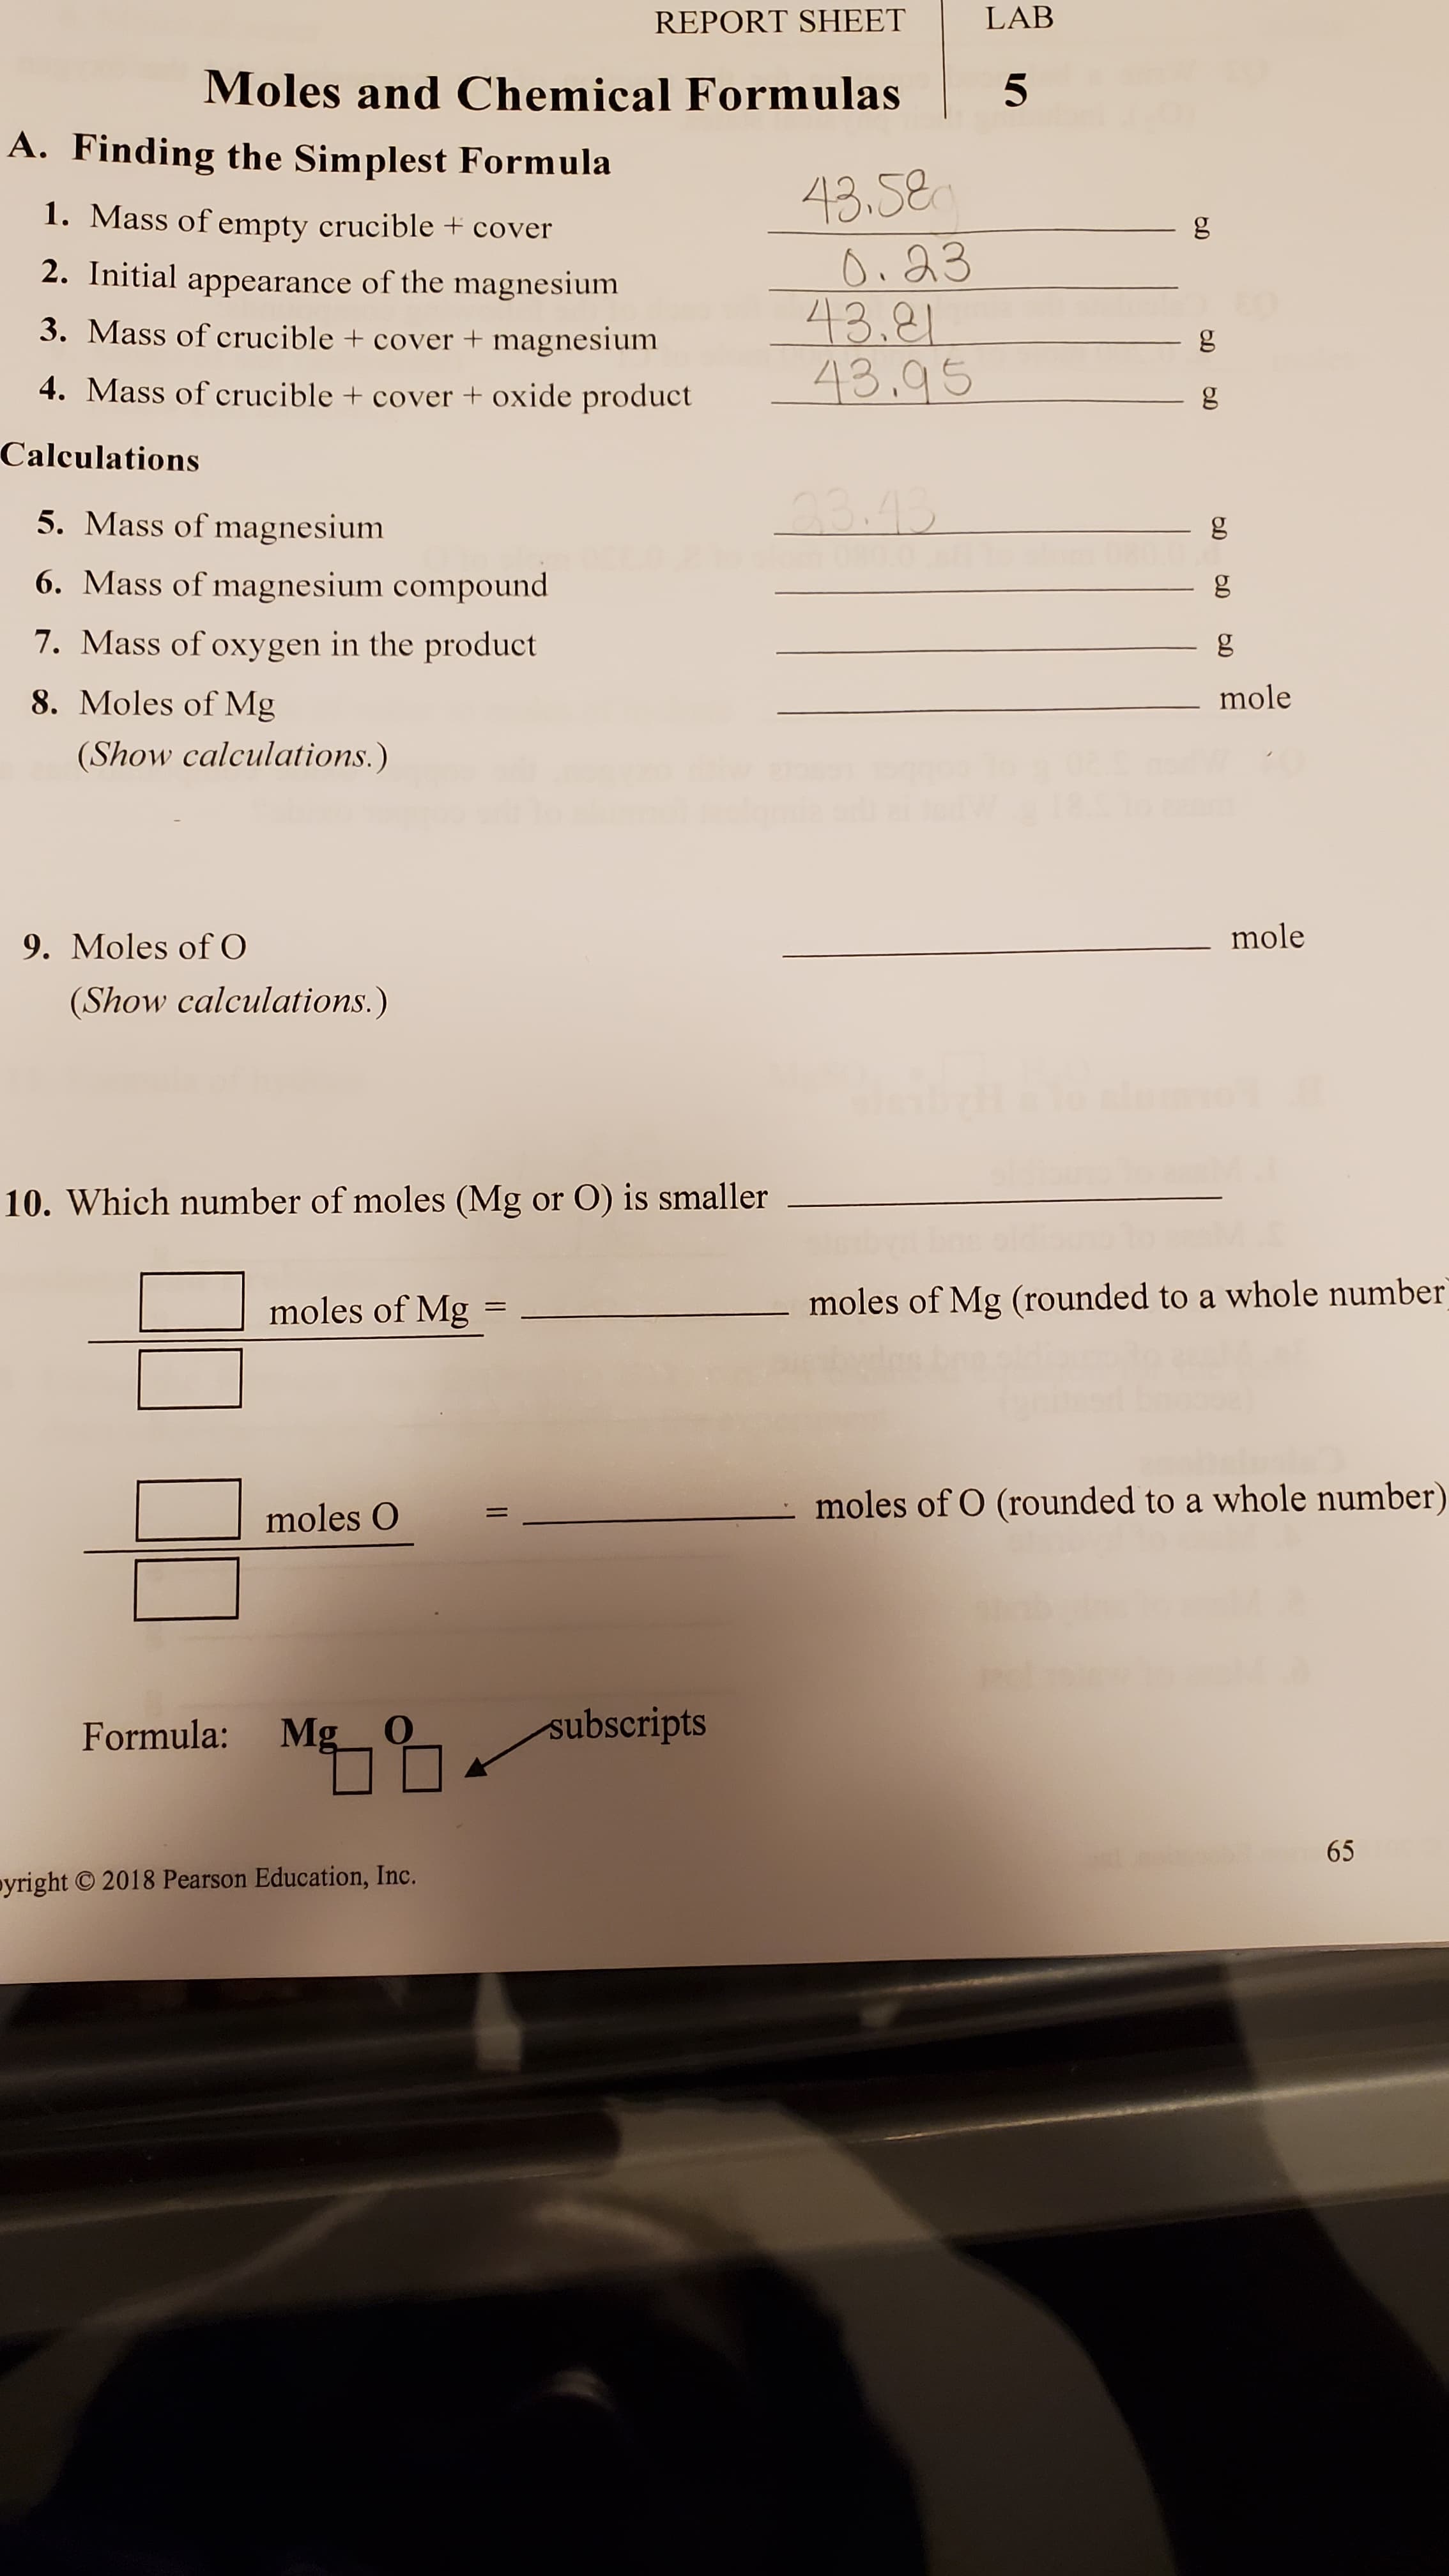 REPORT SHEET
LAB
Moles and Chemical Formulas
A. Finding the Simplest Formula
43.58
Oi 23
43.81
43.95
1. Mass of empty crucible + cover
2. Initial appearance of the magnesium
3. Mass of crucible + cover + magnesium
g
4. Mass of crucible + cover + oxide product
Calculations
5. Mass of magnesium
23.43
6. Mass of magnesium compound
7. Mass of oxygen in the product
